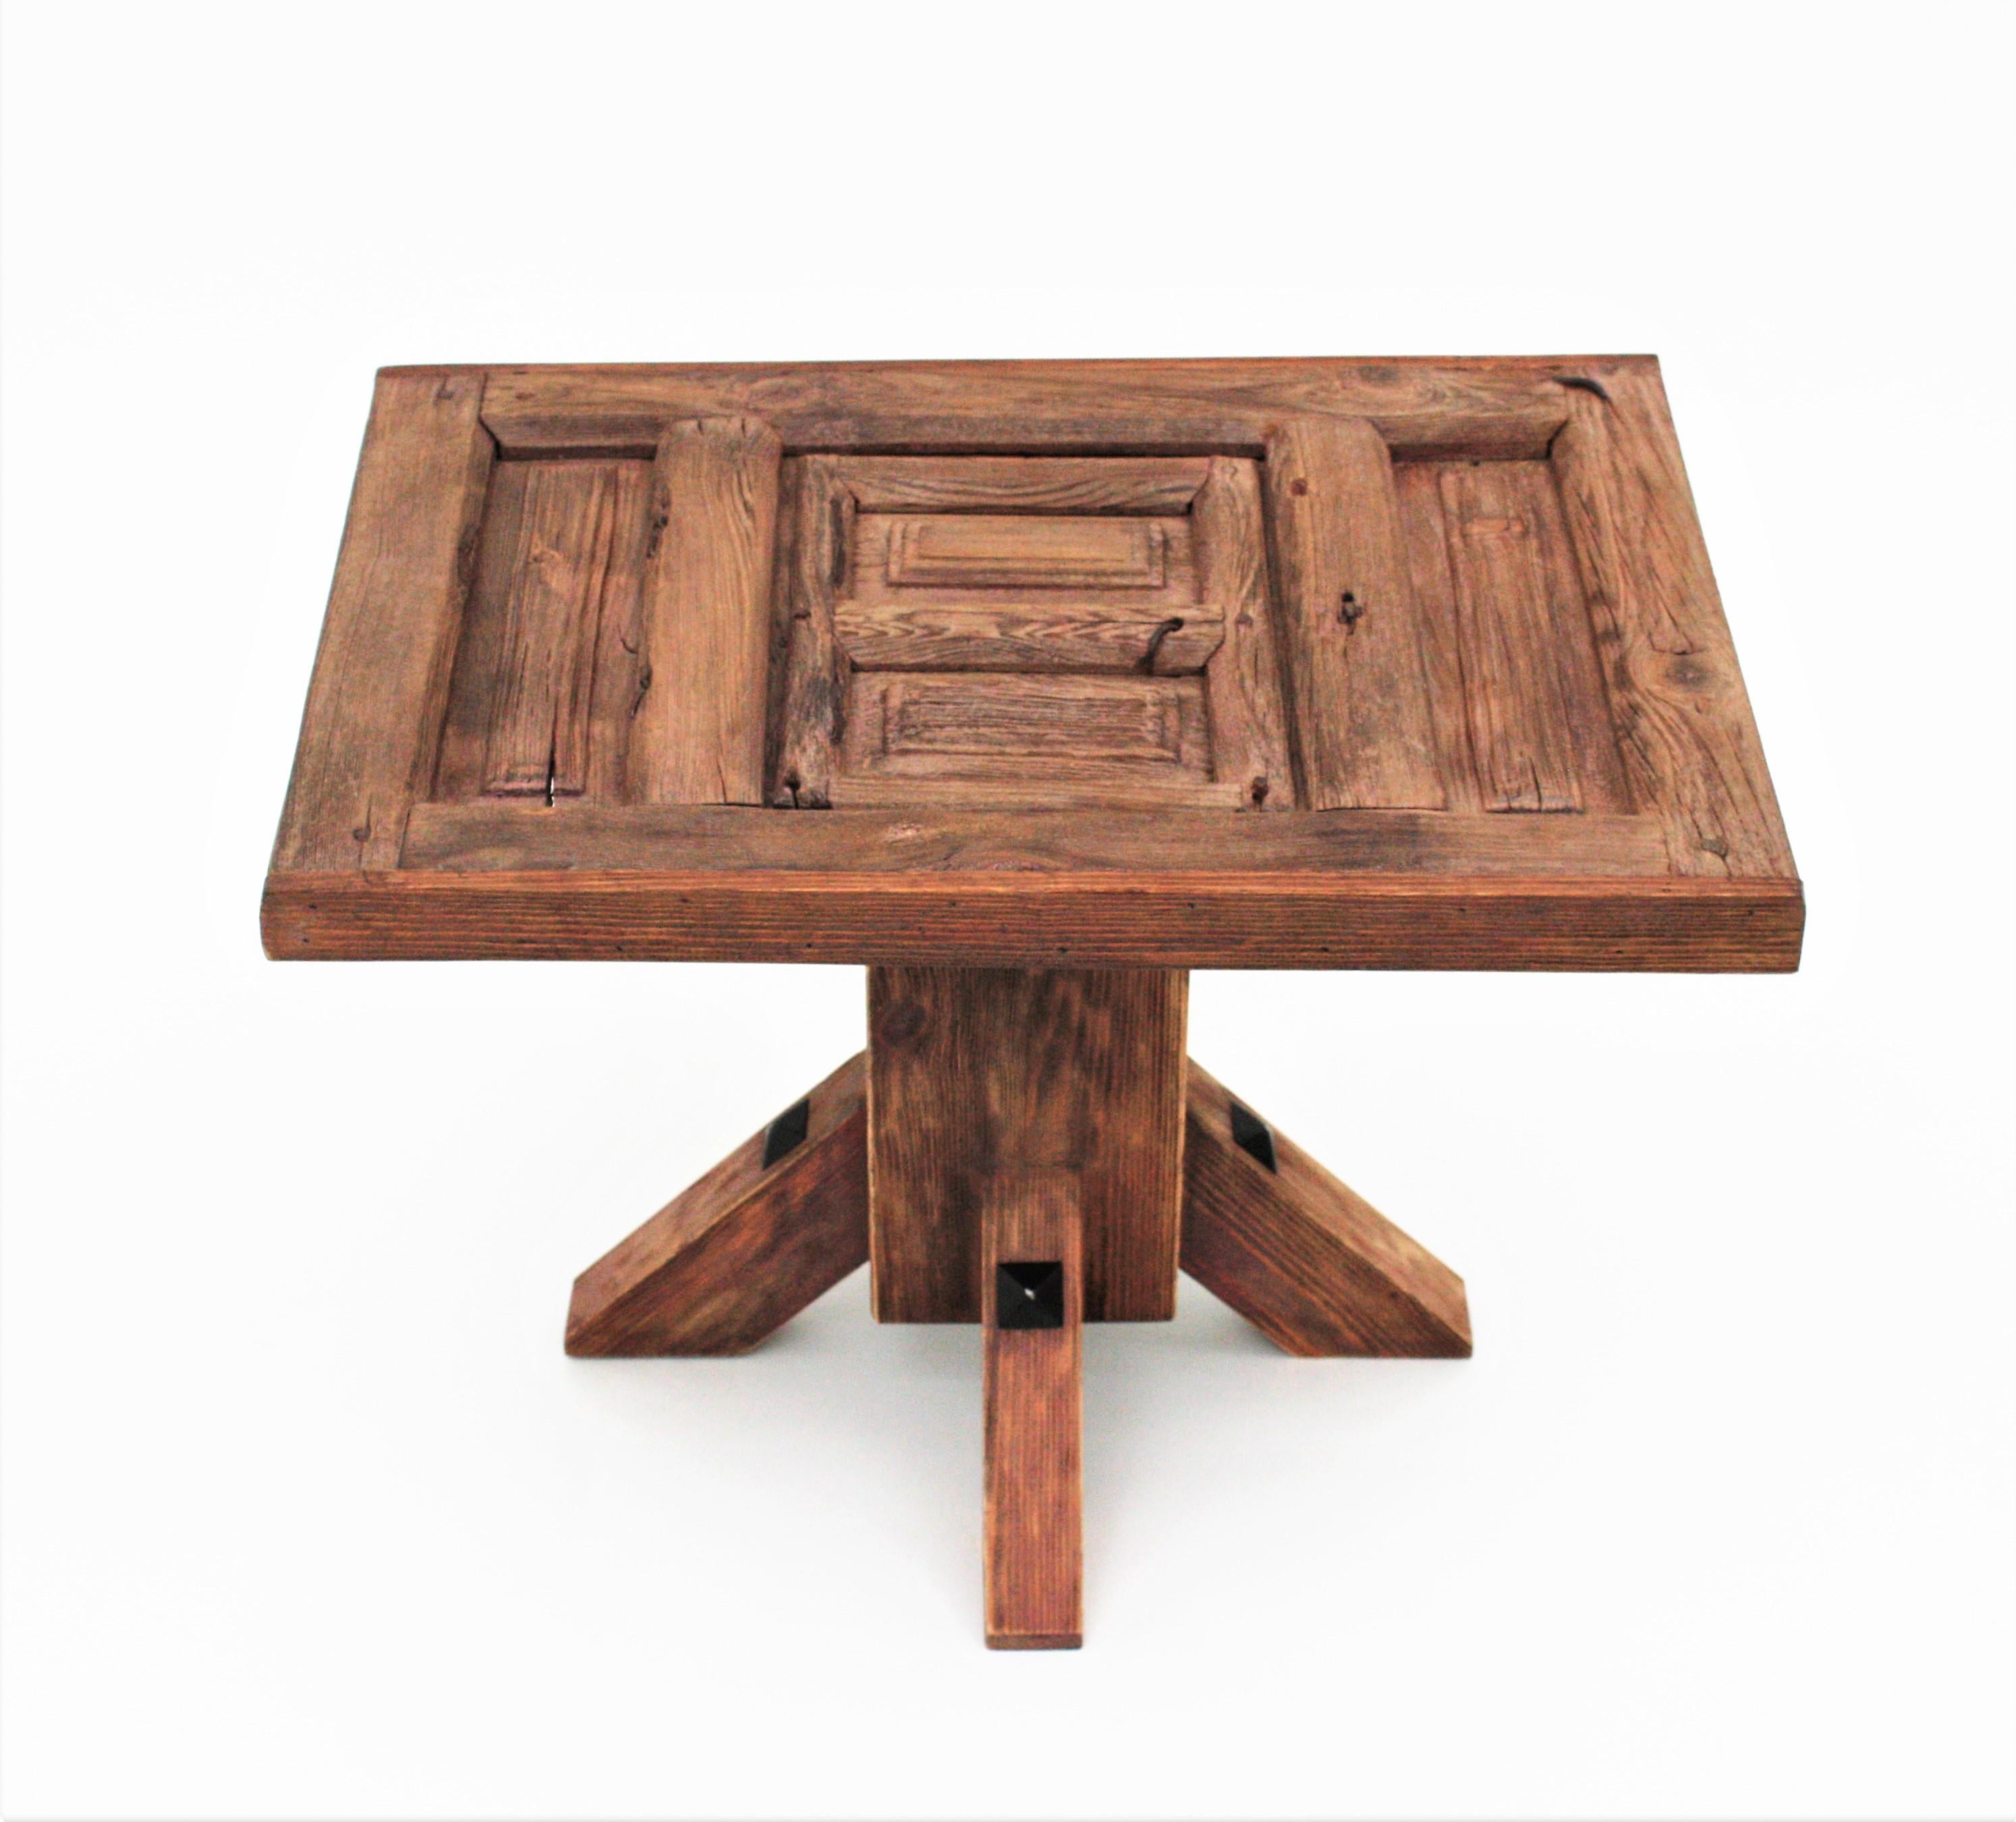 Hand-Crafted Antique Spanish Rustic Coffee Table / Side Table For Sale